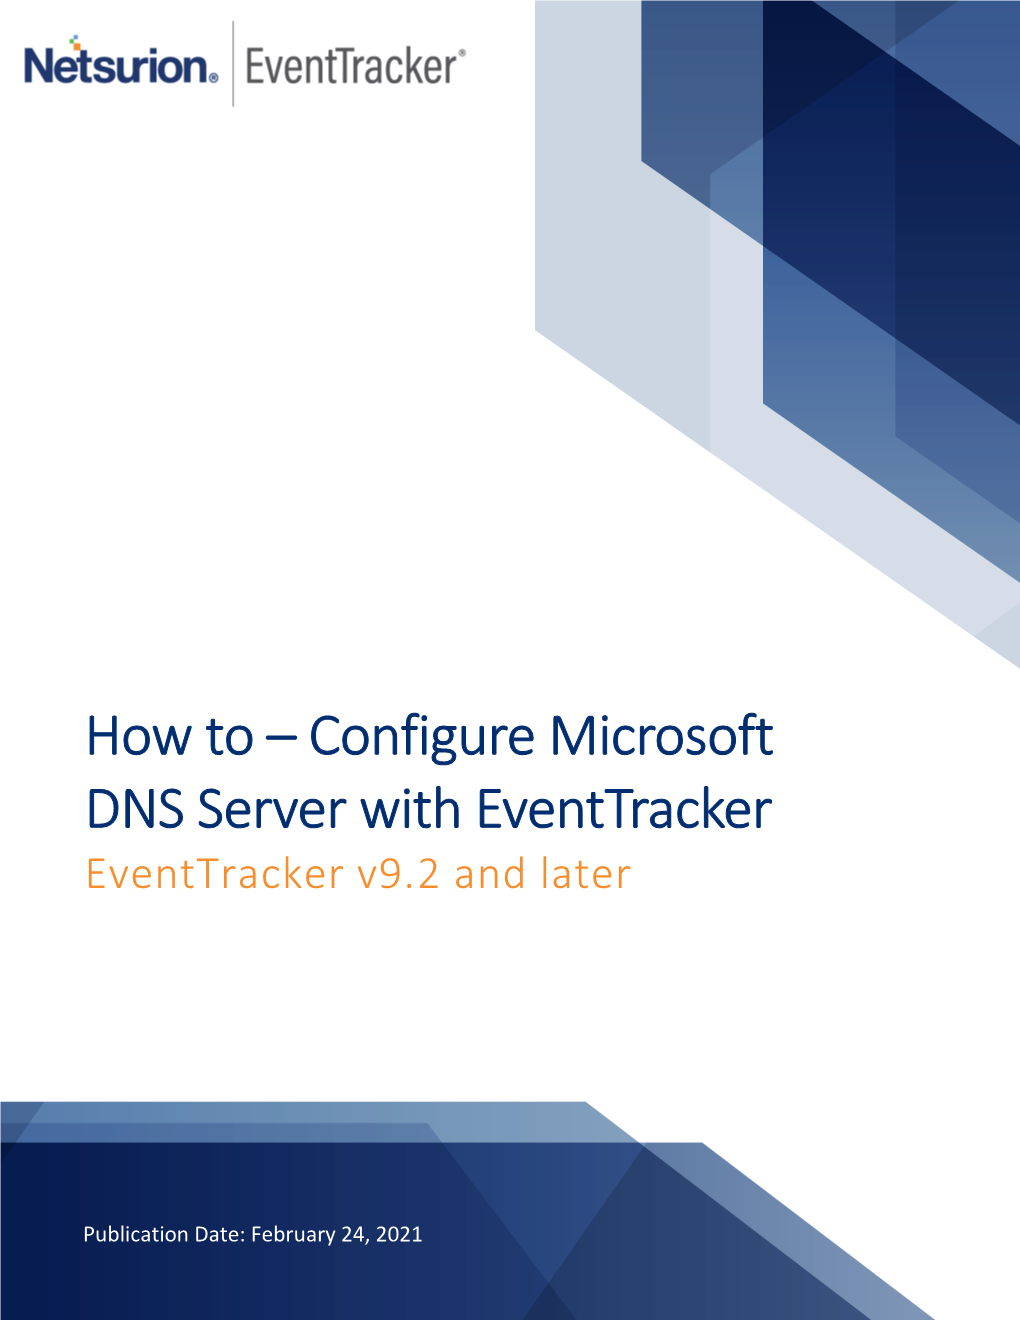 How to – Configure Microsoft DNS Server with Eventtracker Eventtracker V9.2 and Later